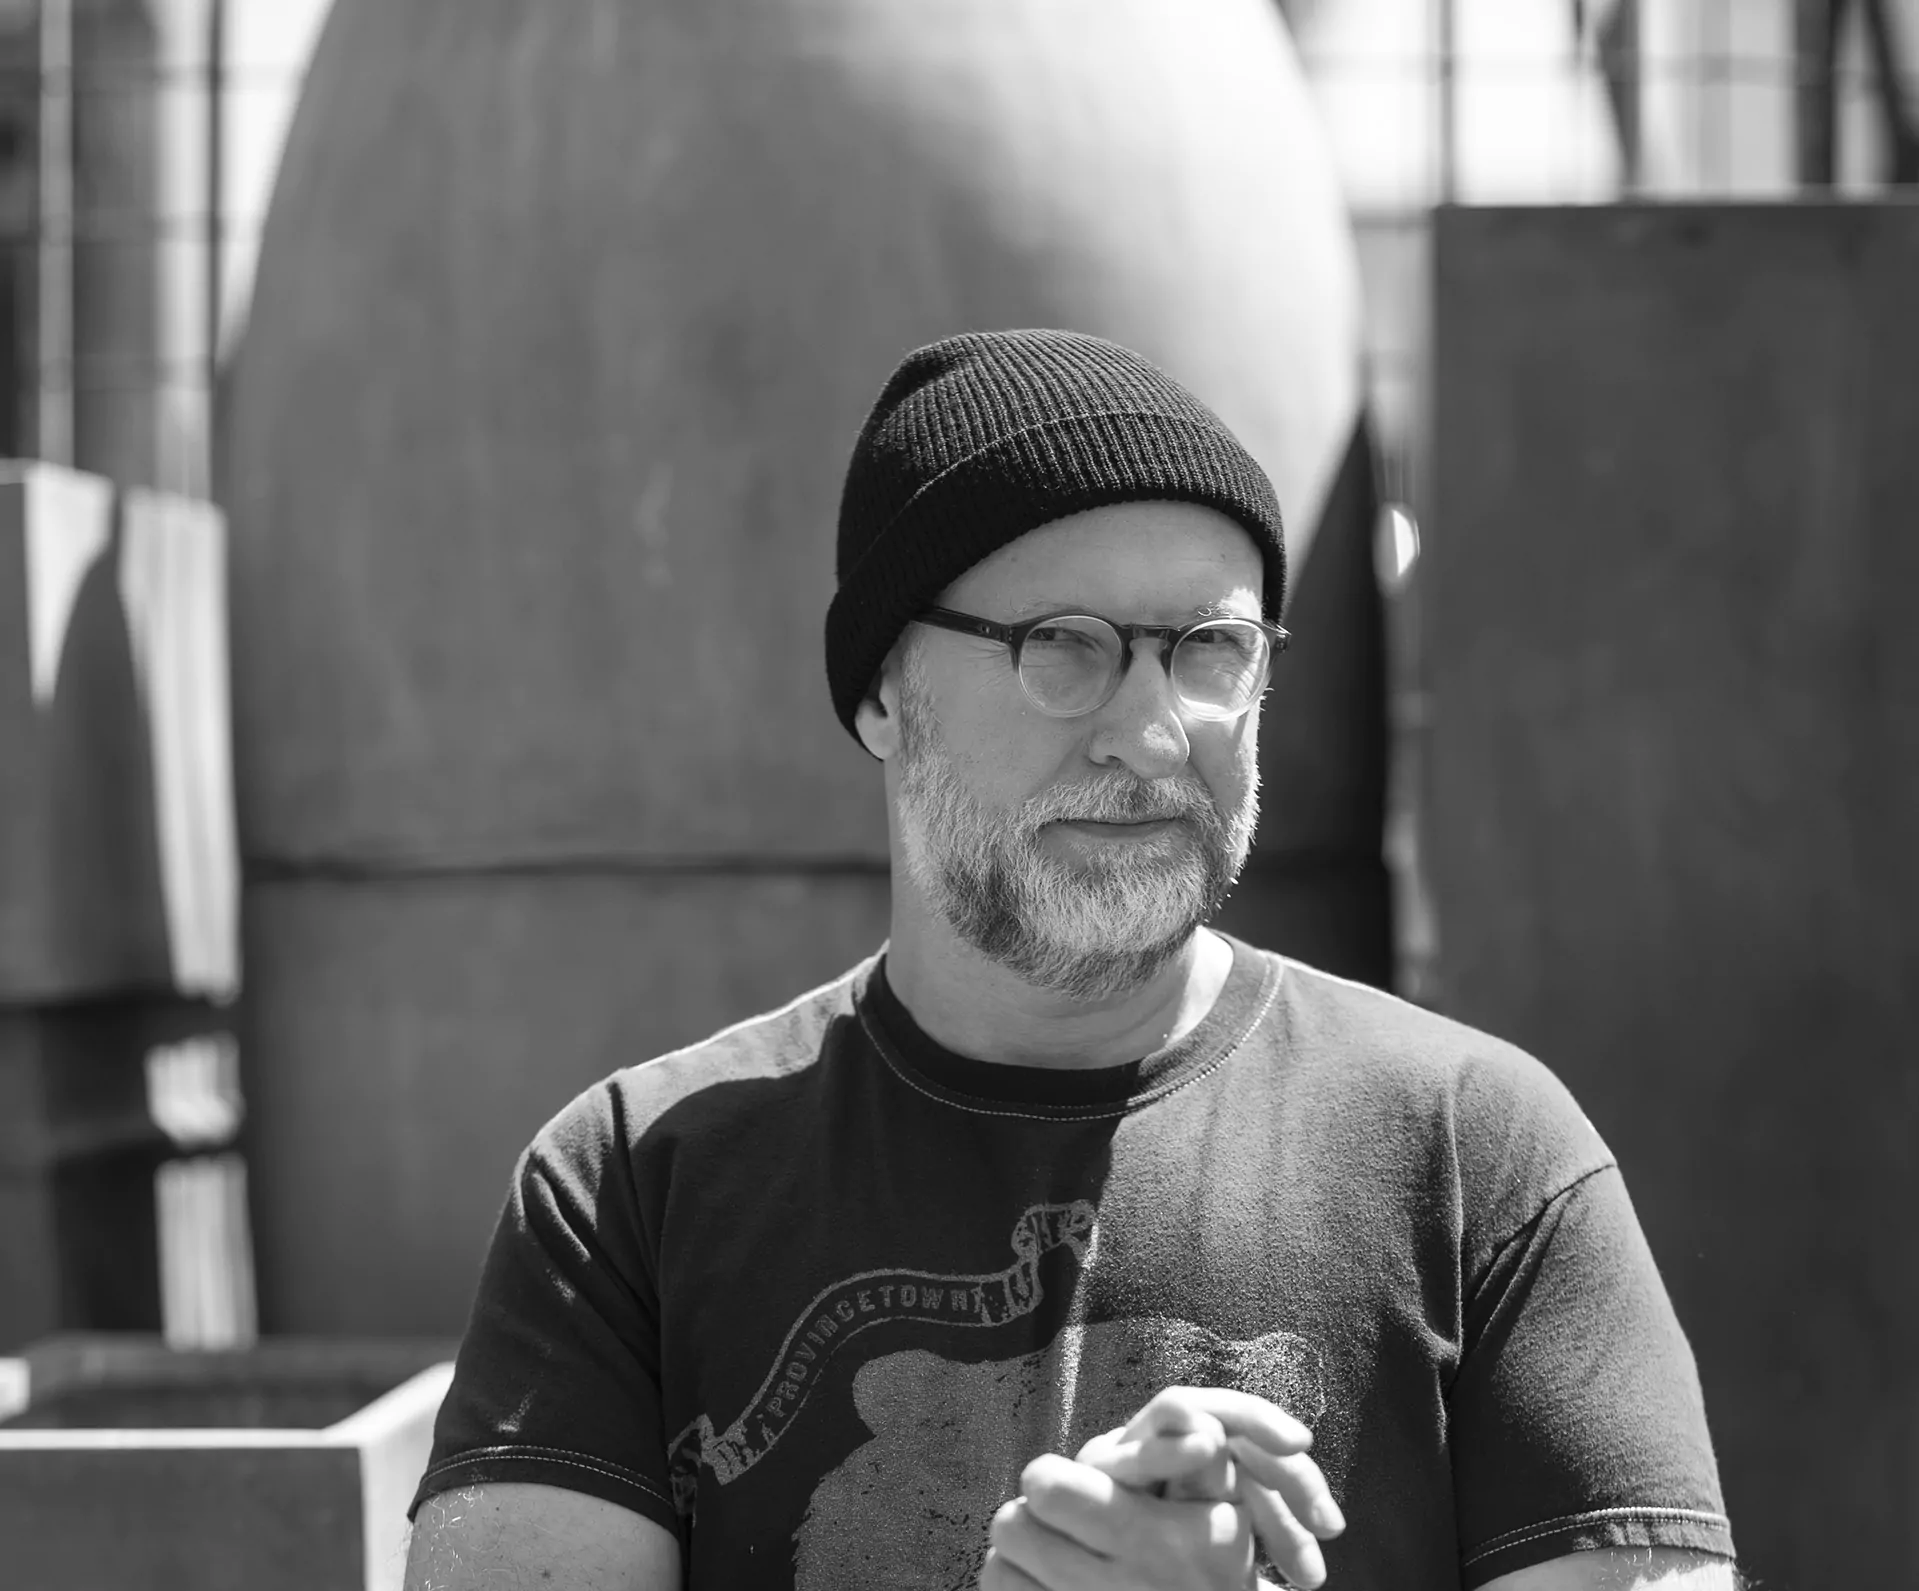 BOB MOULD shares solo performance of ‘Wishing Well’ and trailer for 8LP Distortion: Live boxset